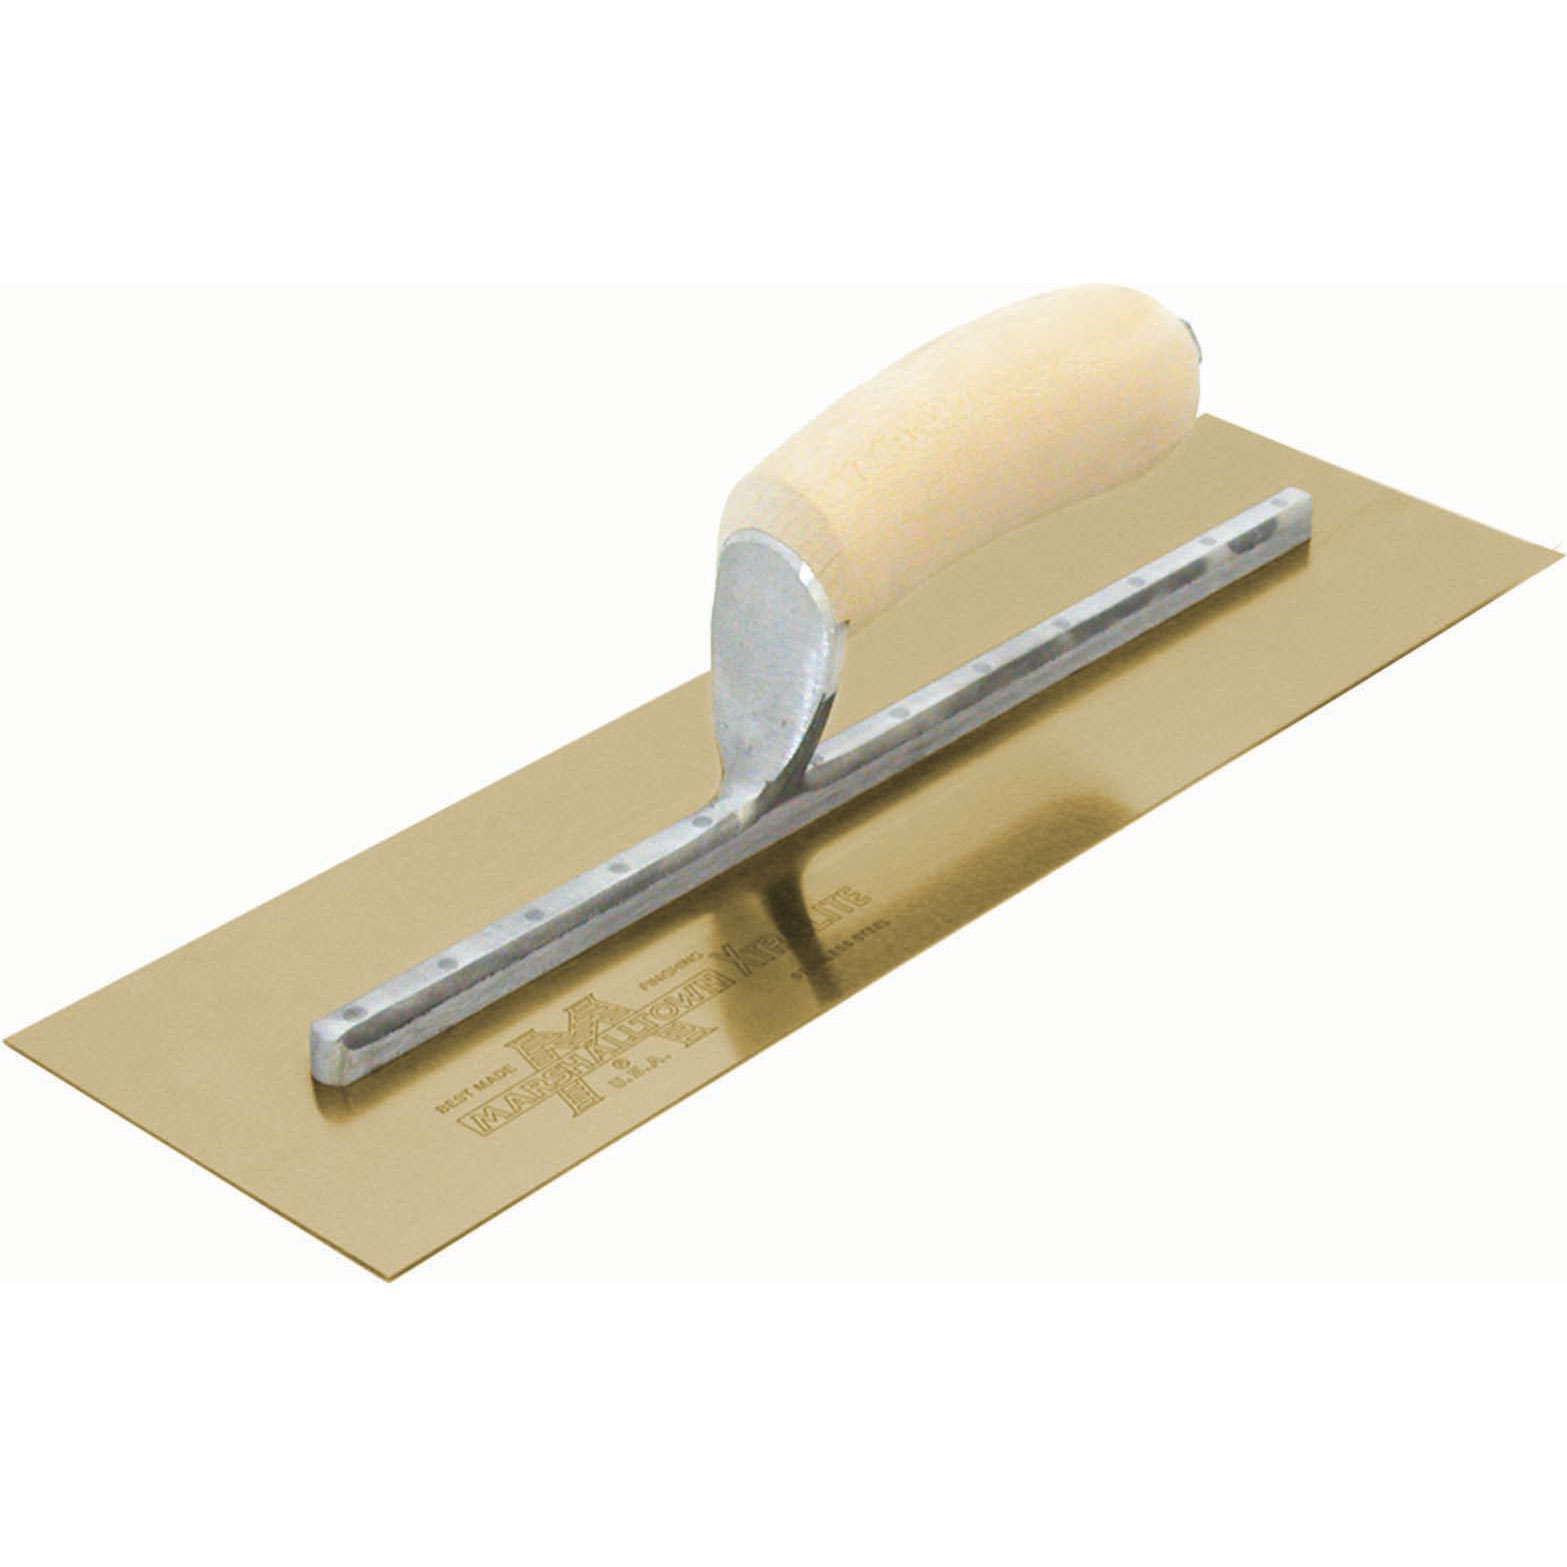 Marshalltown MXS7GS 12in X 5in Golden Stainless Finishing Trowel with Curved Wood Handle MXS7GS